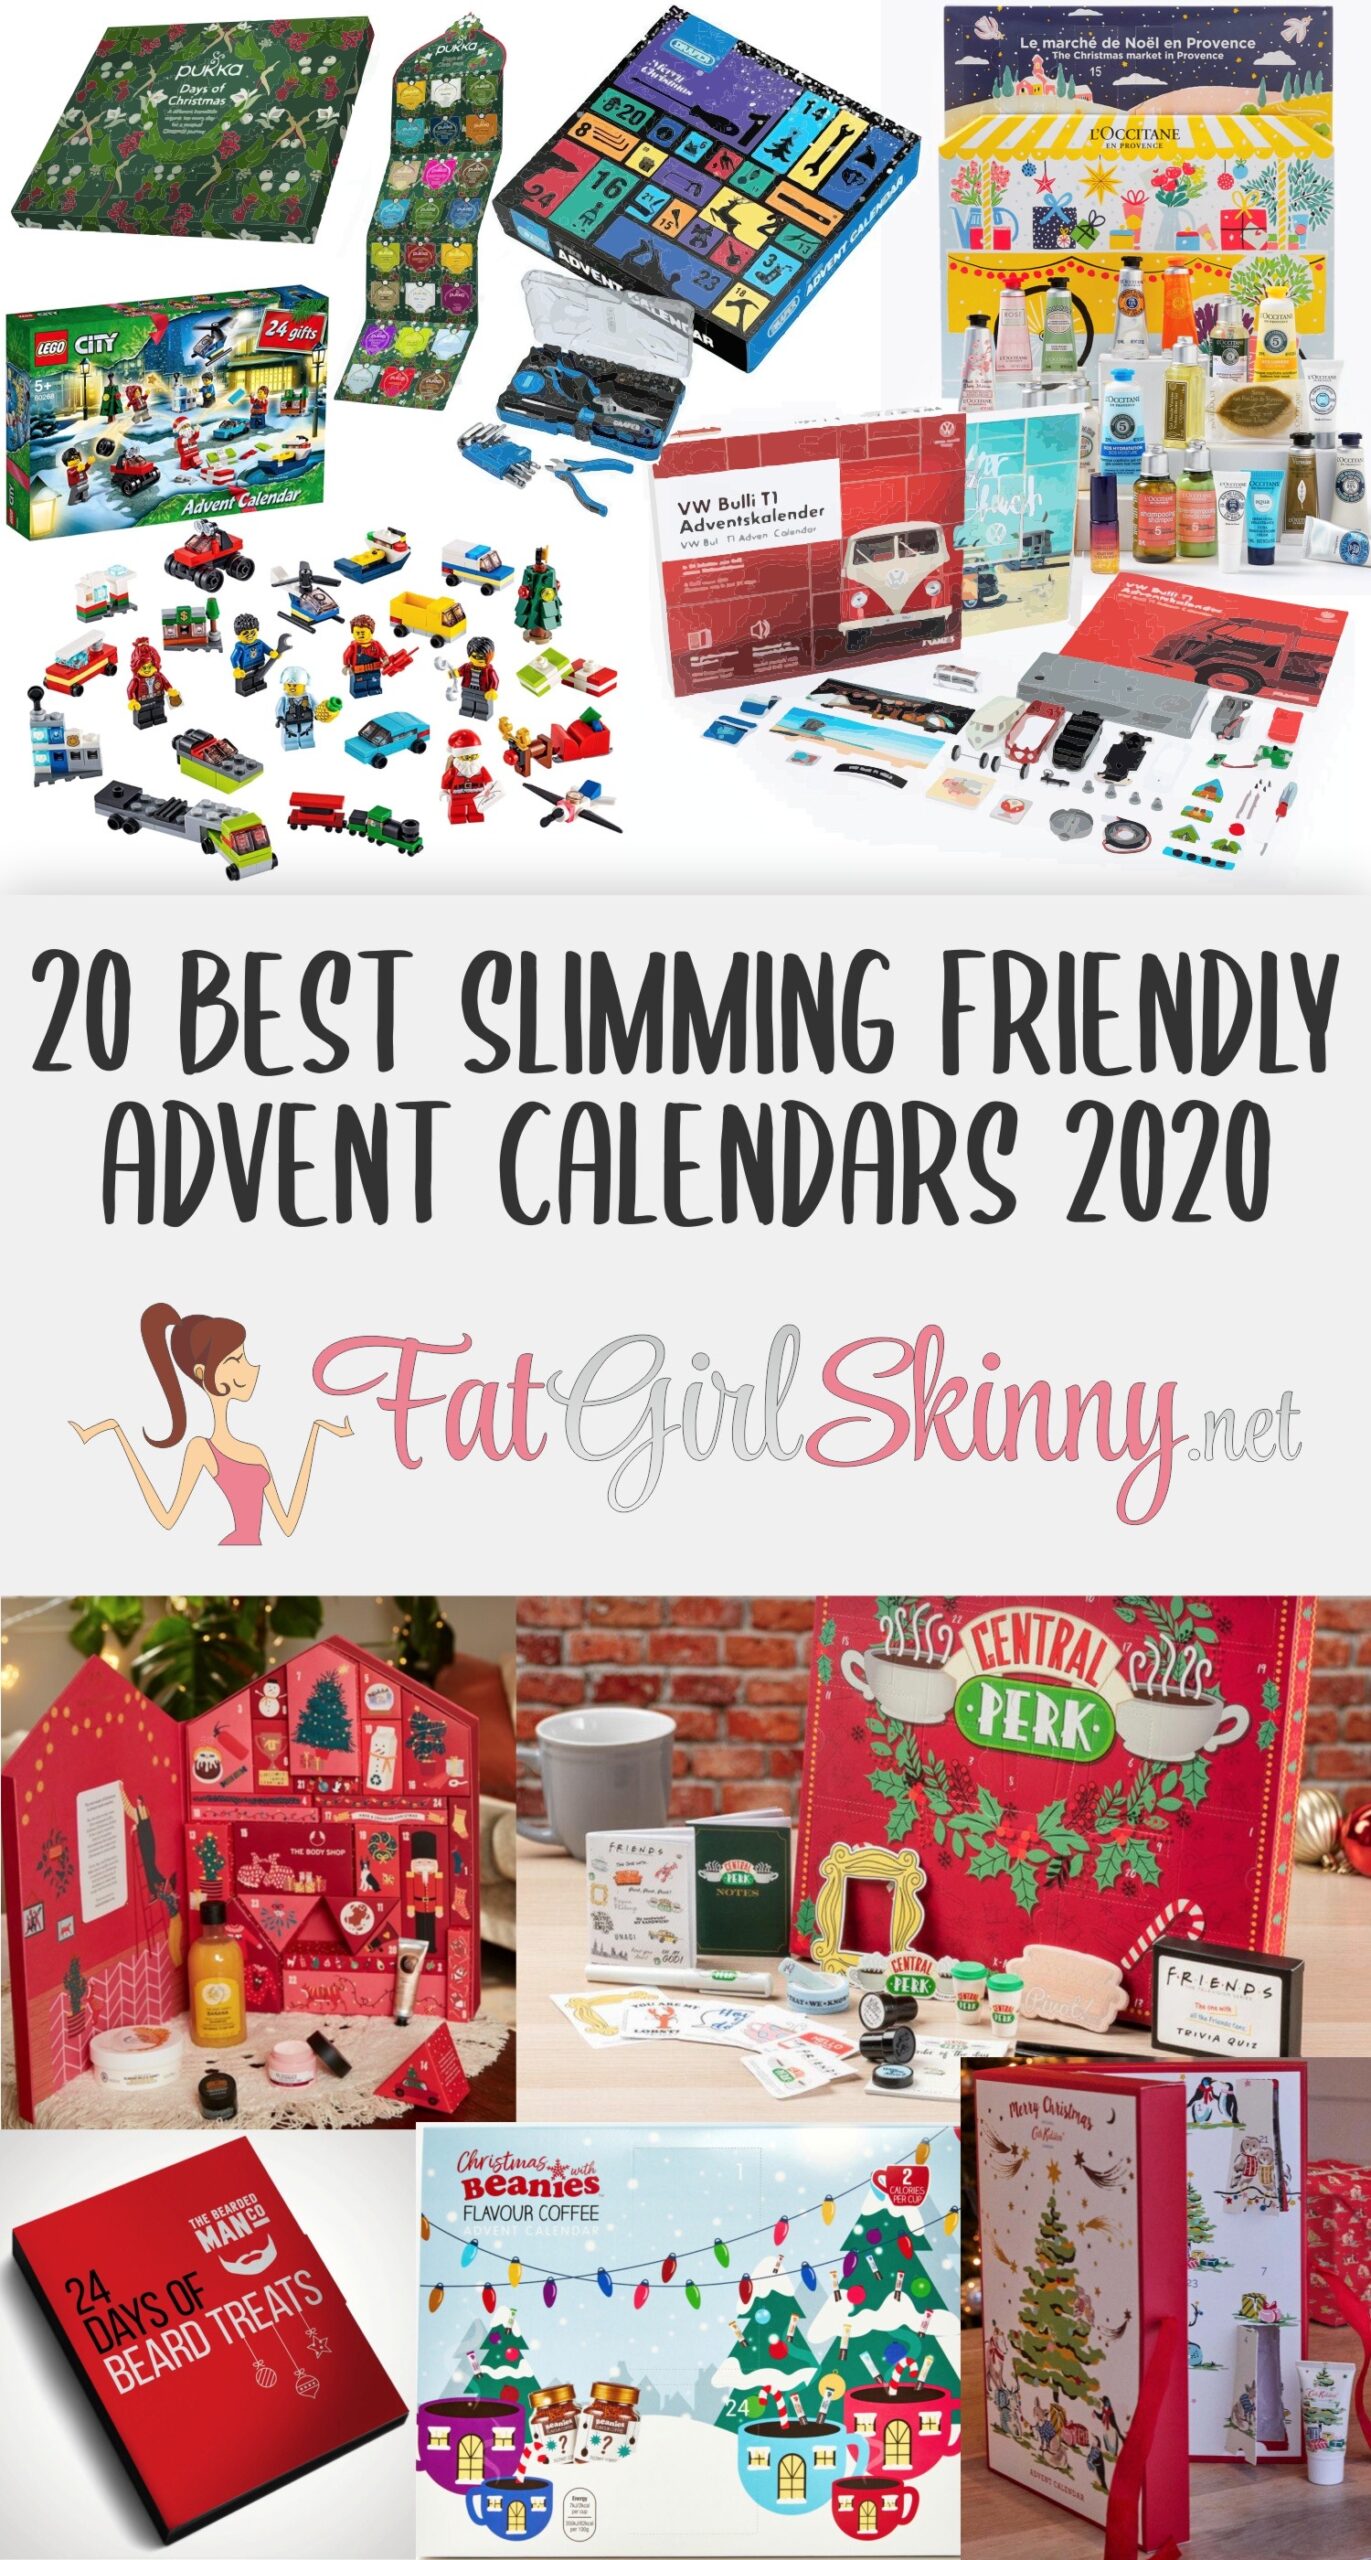 Lucy Long Healthcare 20 Best Slimming Friendly Advent Calendars 2020